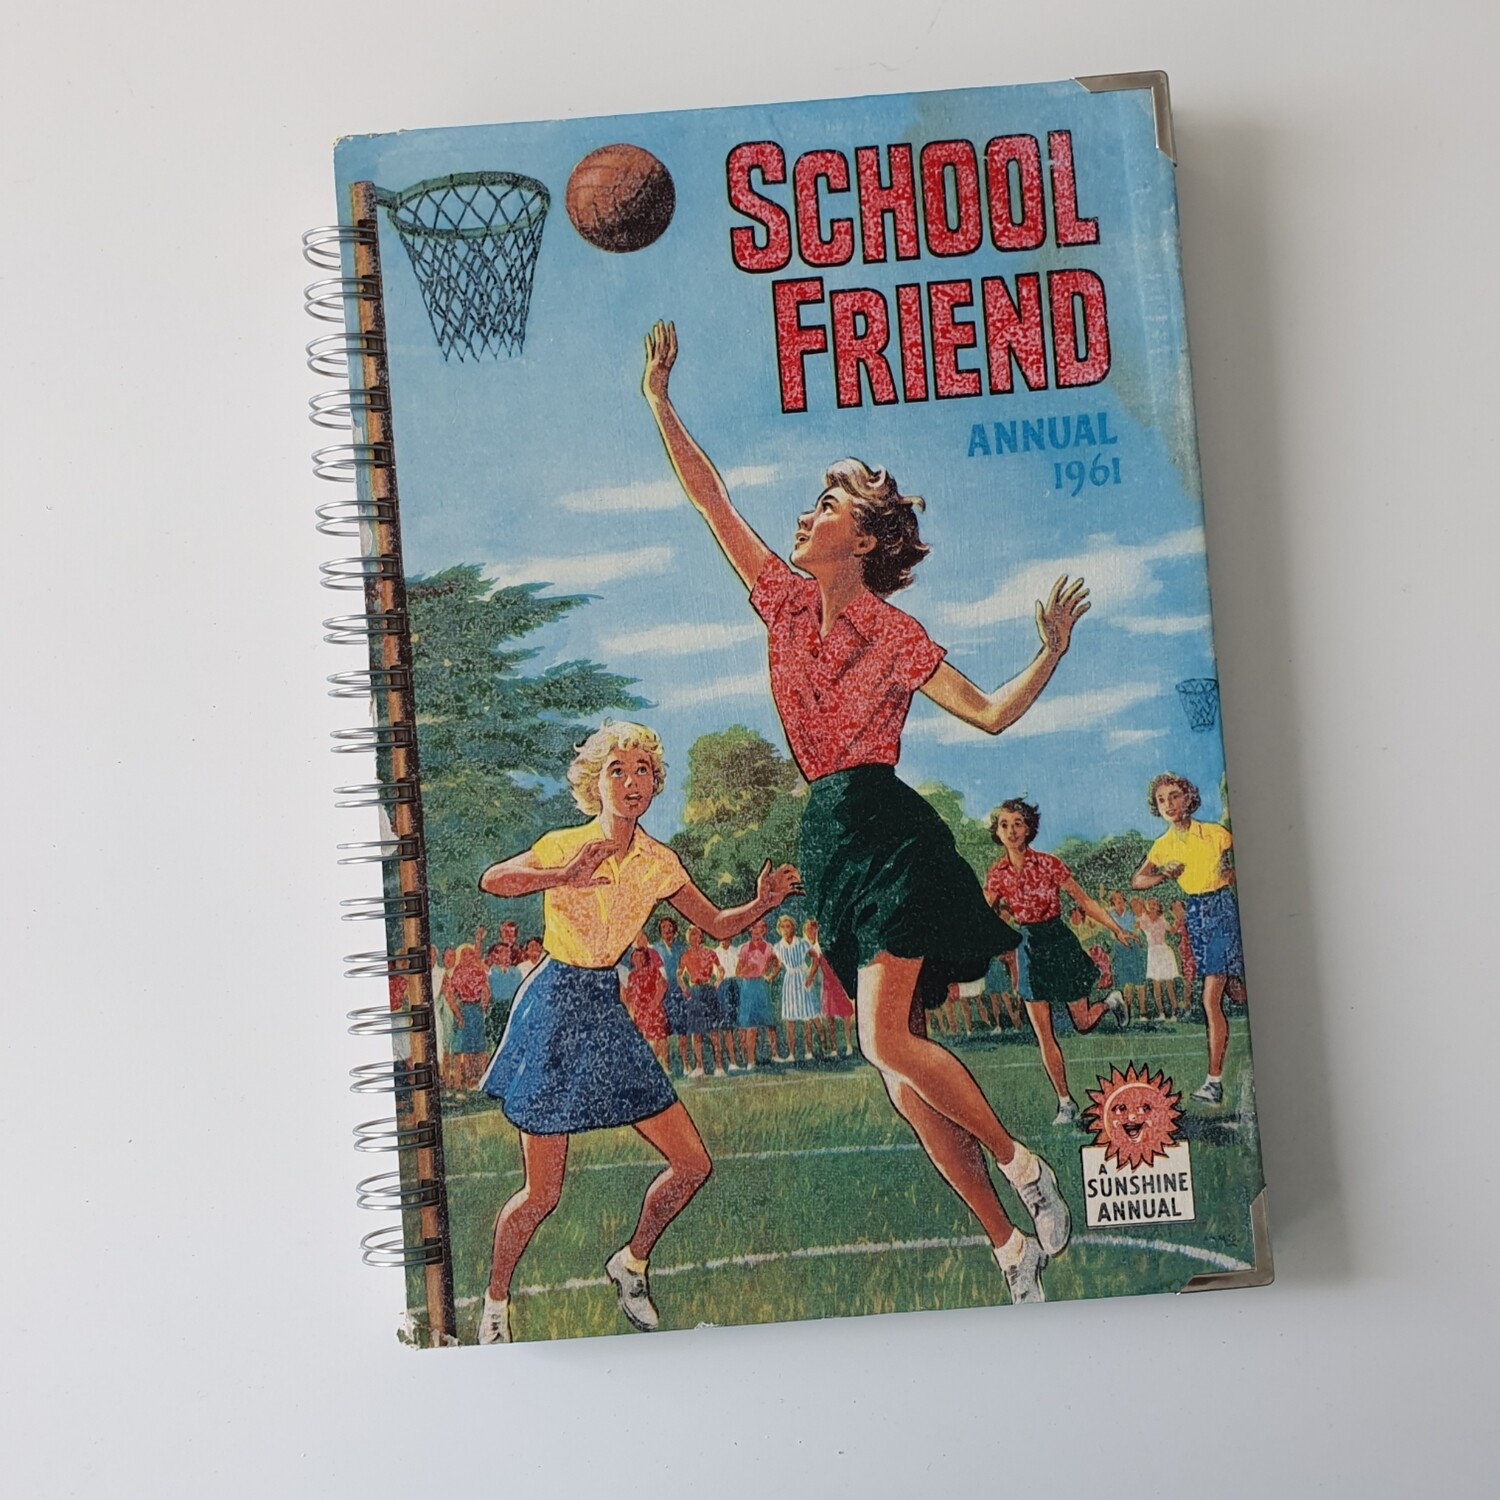 School Friend Annual 1961, Netball plain paper notebook comes with metal book corners